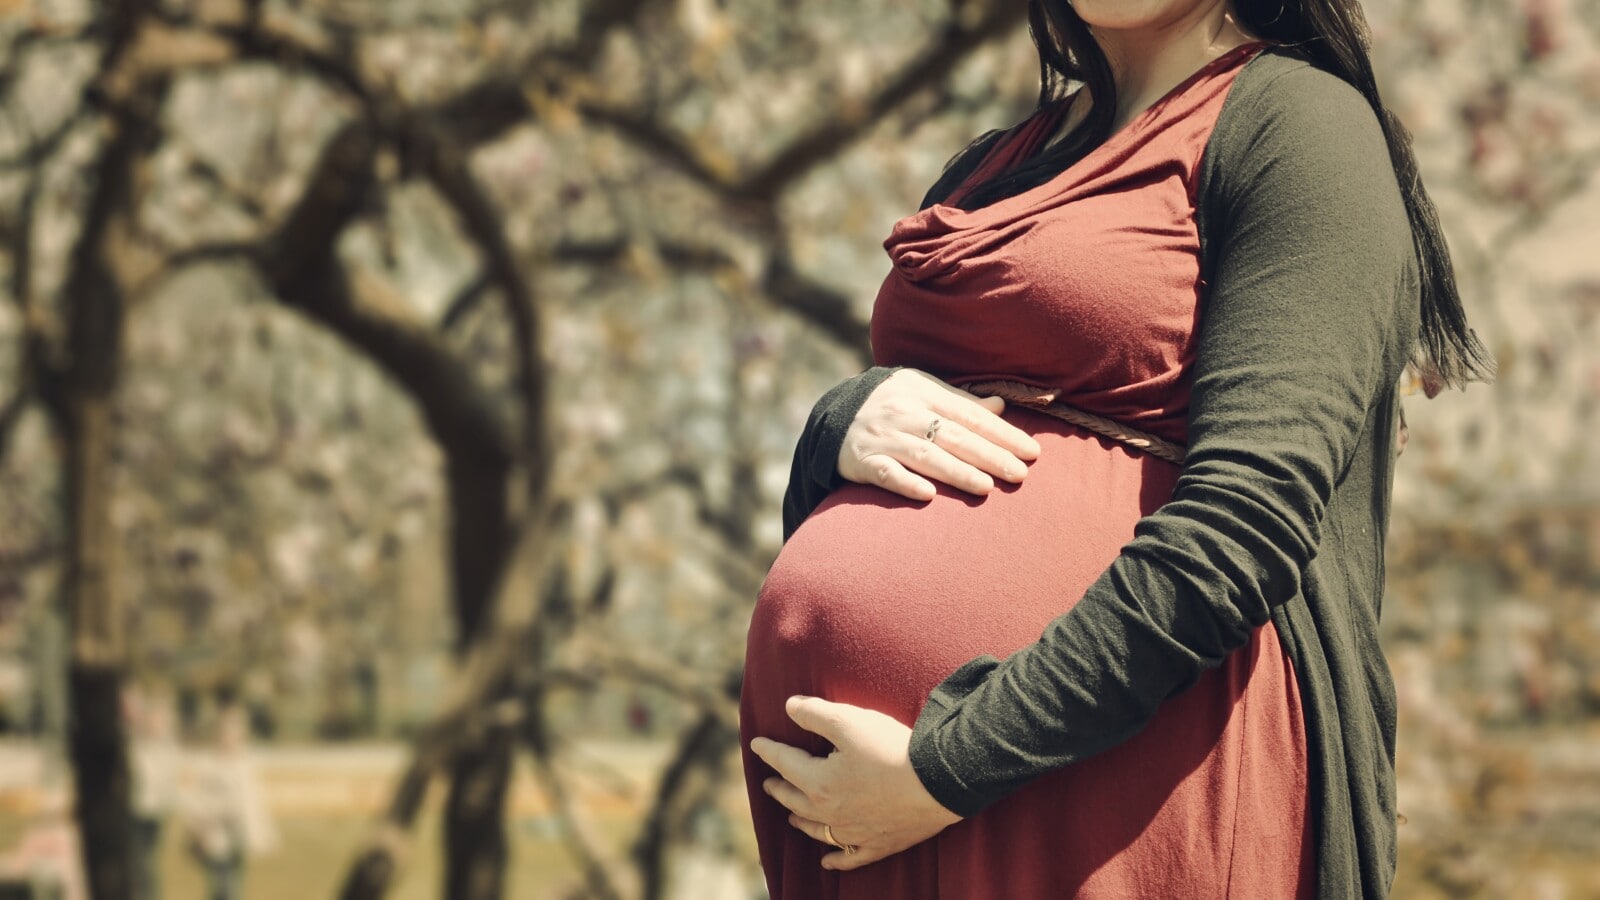 A pregnant person holding their stomach